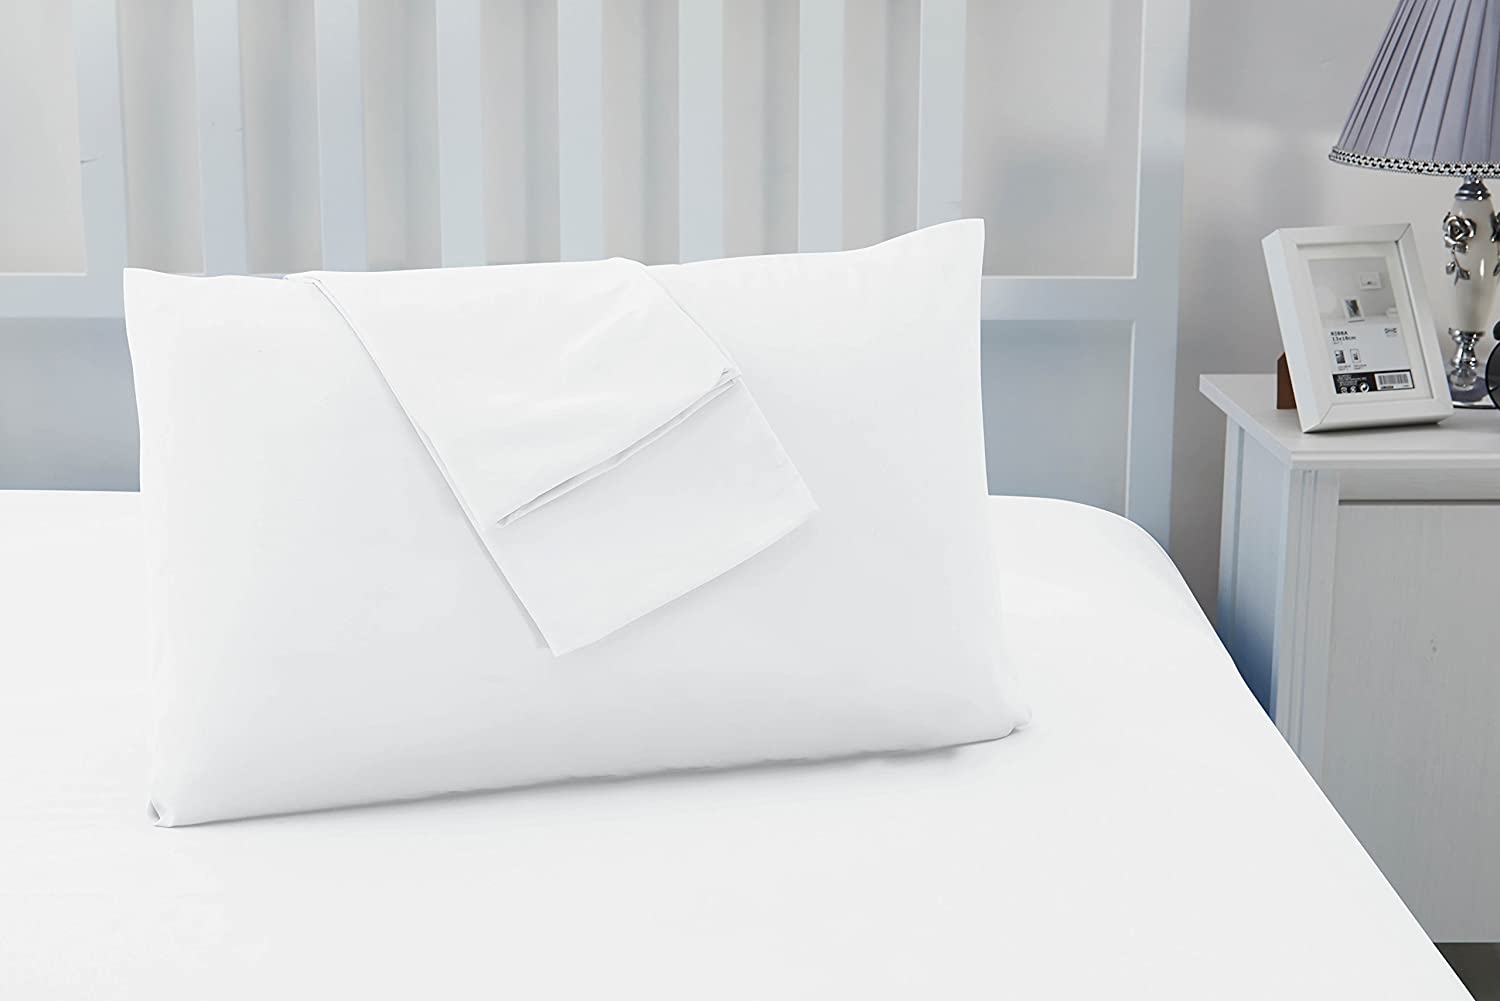 Sonia Moer White Luxury Microfibre Pillowcases RRP £5.99 CLEARANCE XL £4.99